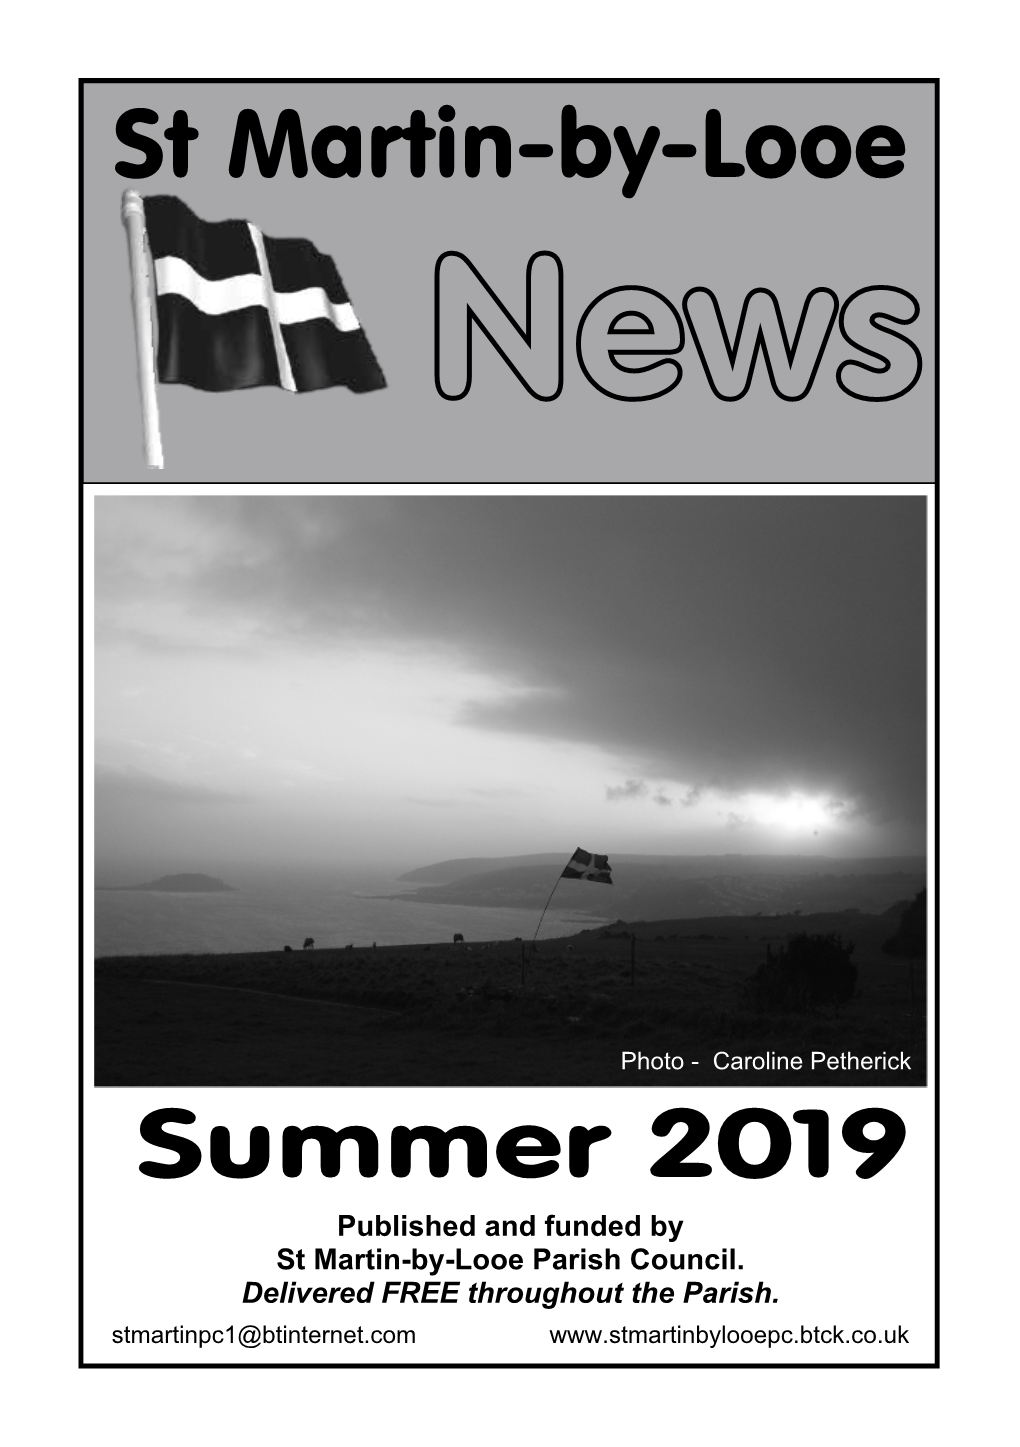 Summer 2019 Published and Funded by St Martin-By-Looe Parish Council